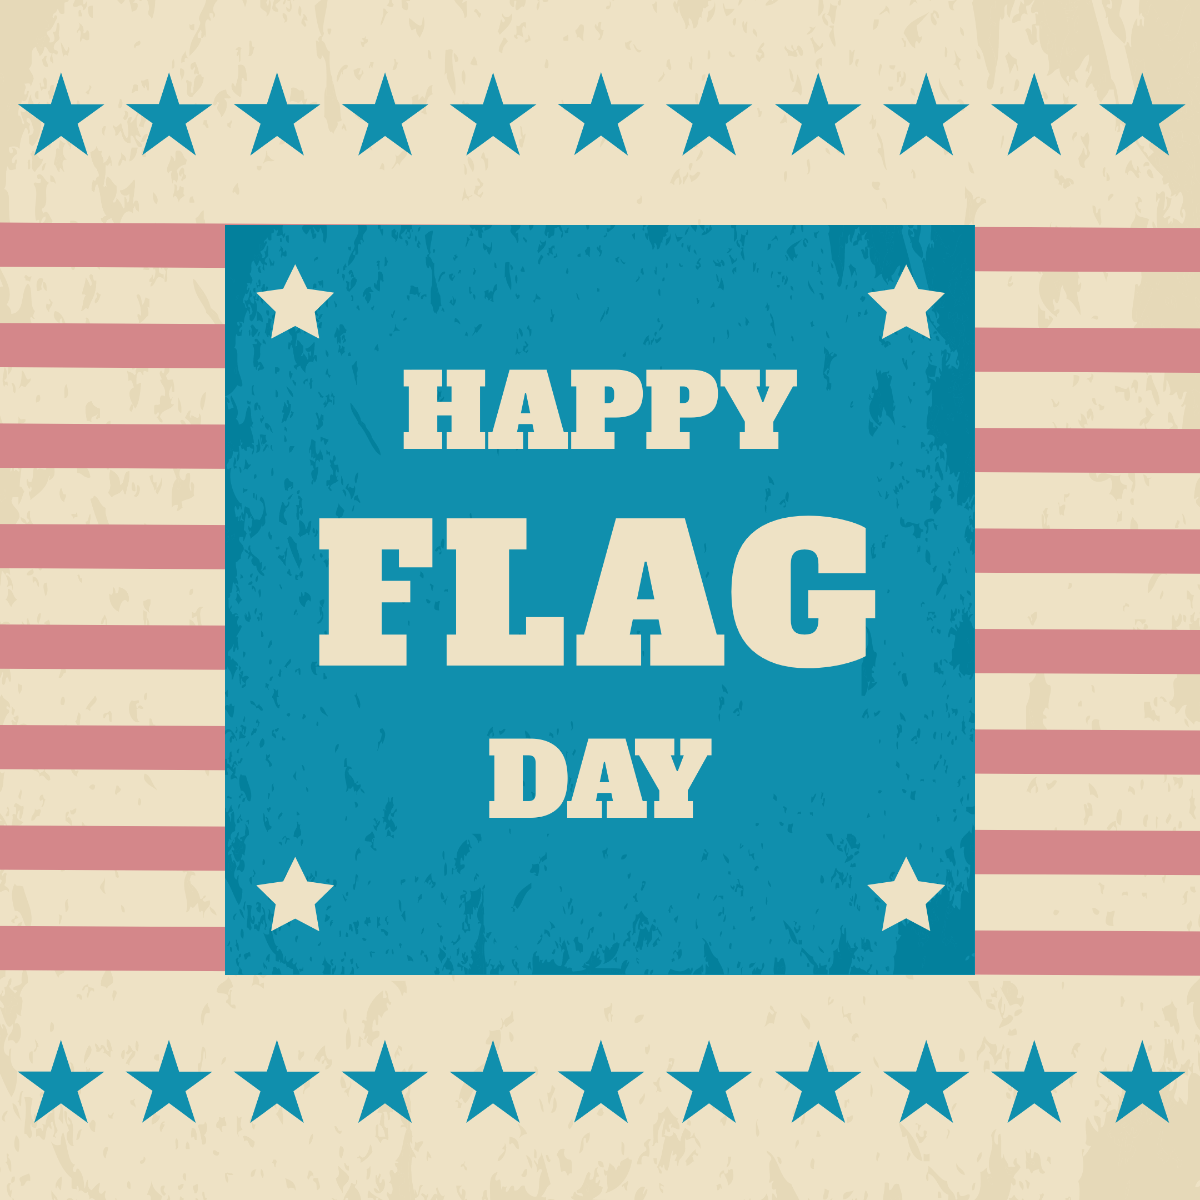 Free Vintage Happy Flag Day Template